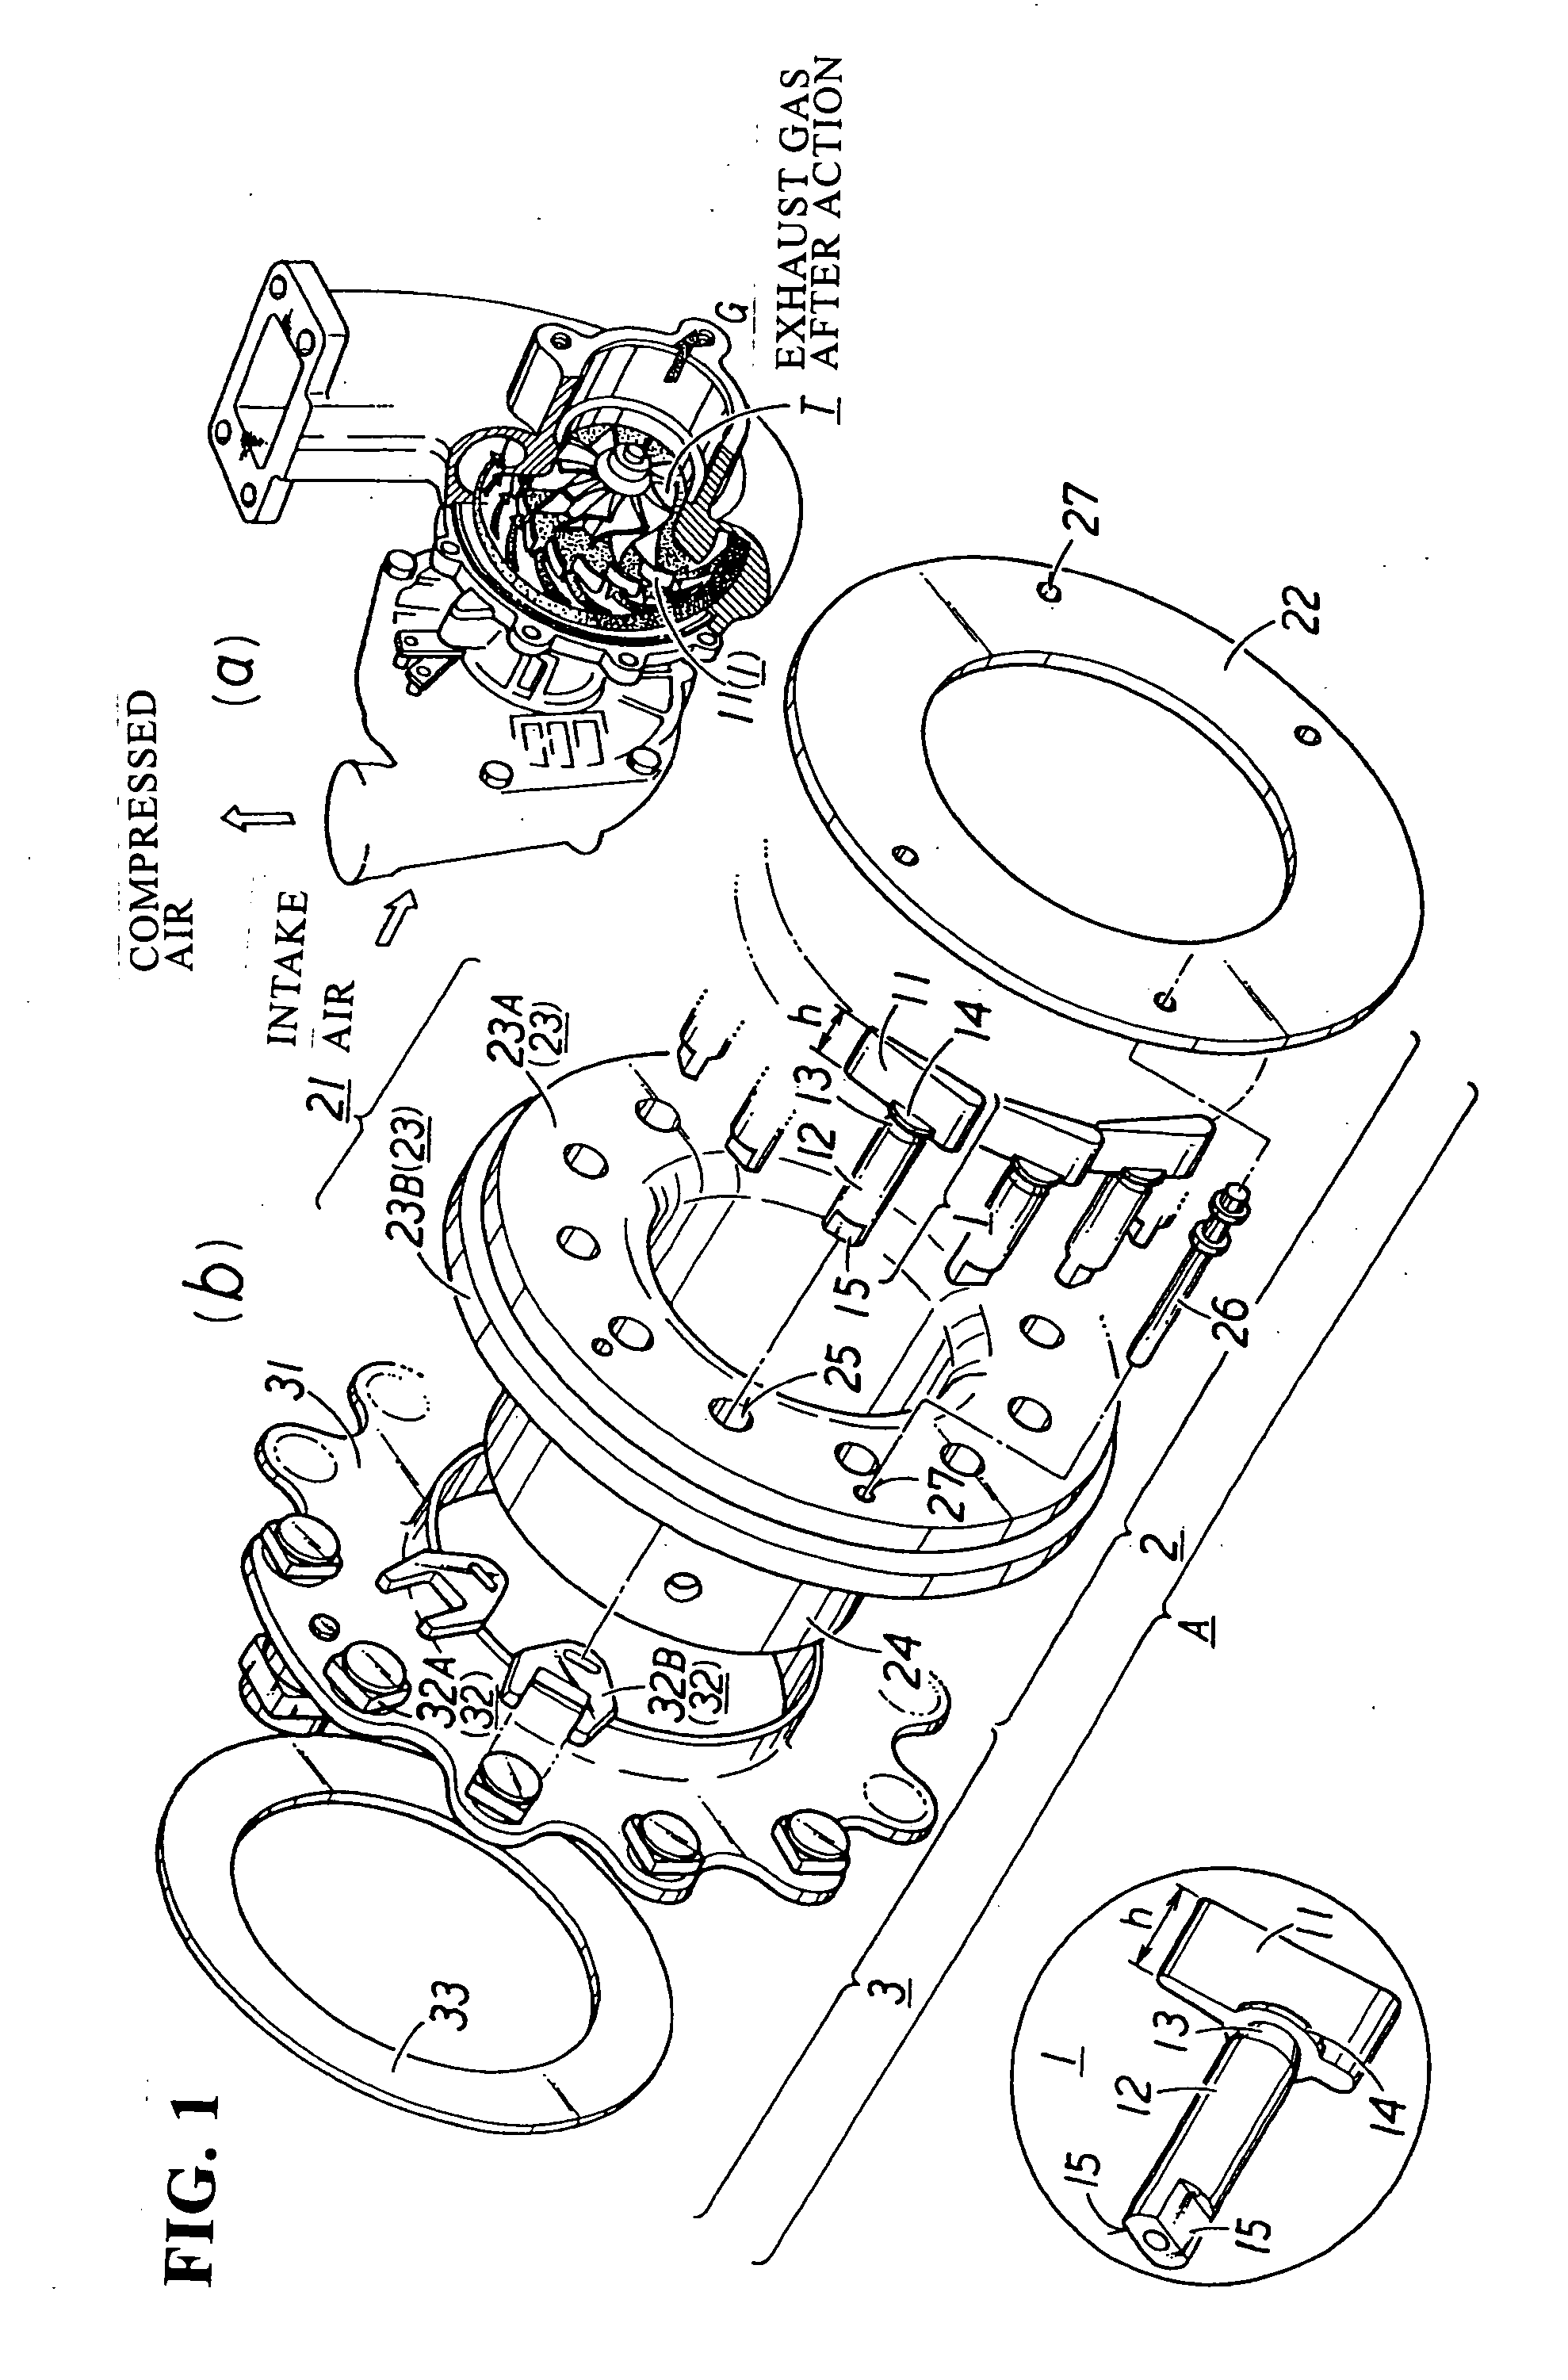 Surface-reformed exhaust gas guide assembly of vgs type turbo charger, and method surface-reforming component member thereof